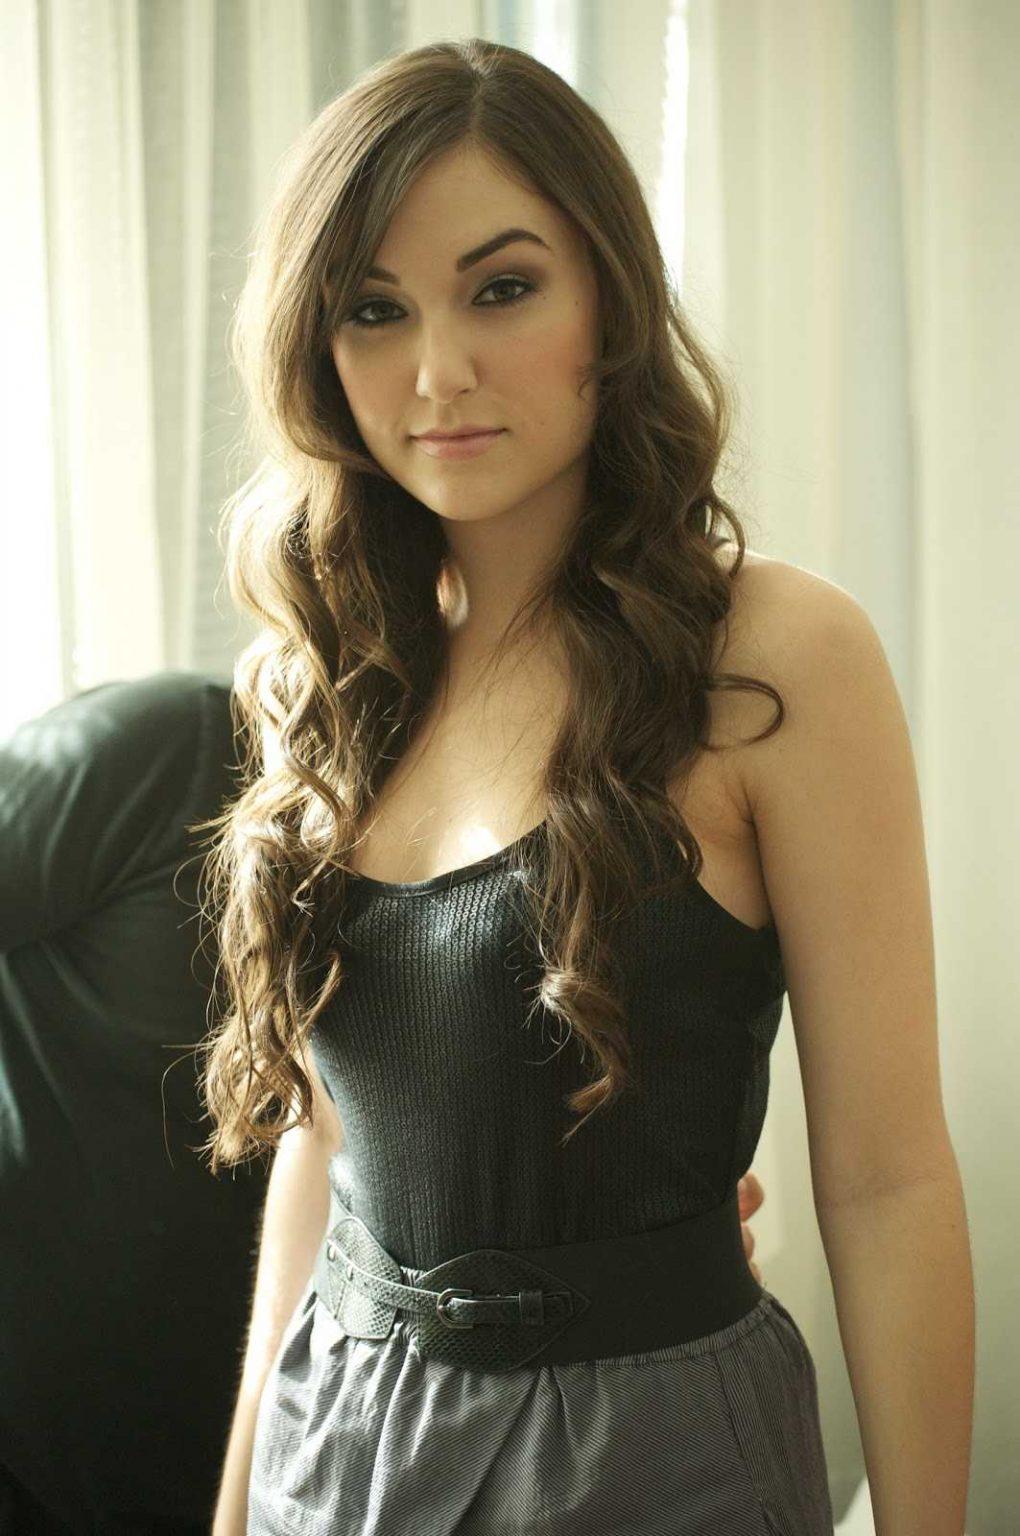 44 Sasha Grey Nude Pictures Can Be Pleasurable And Pleasing To Look At | Best Of Comic Books